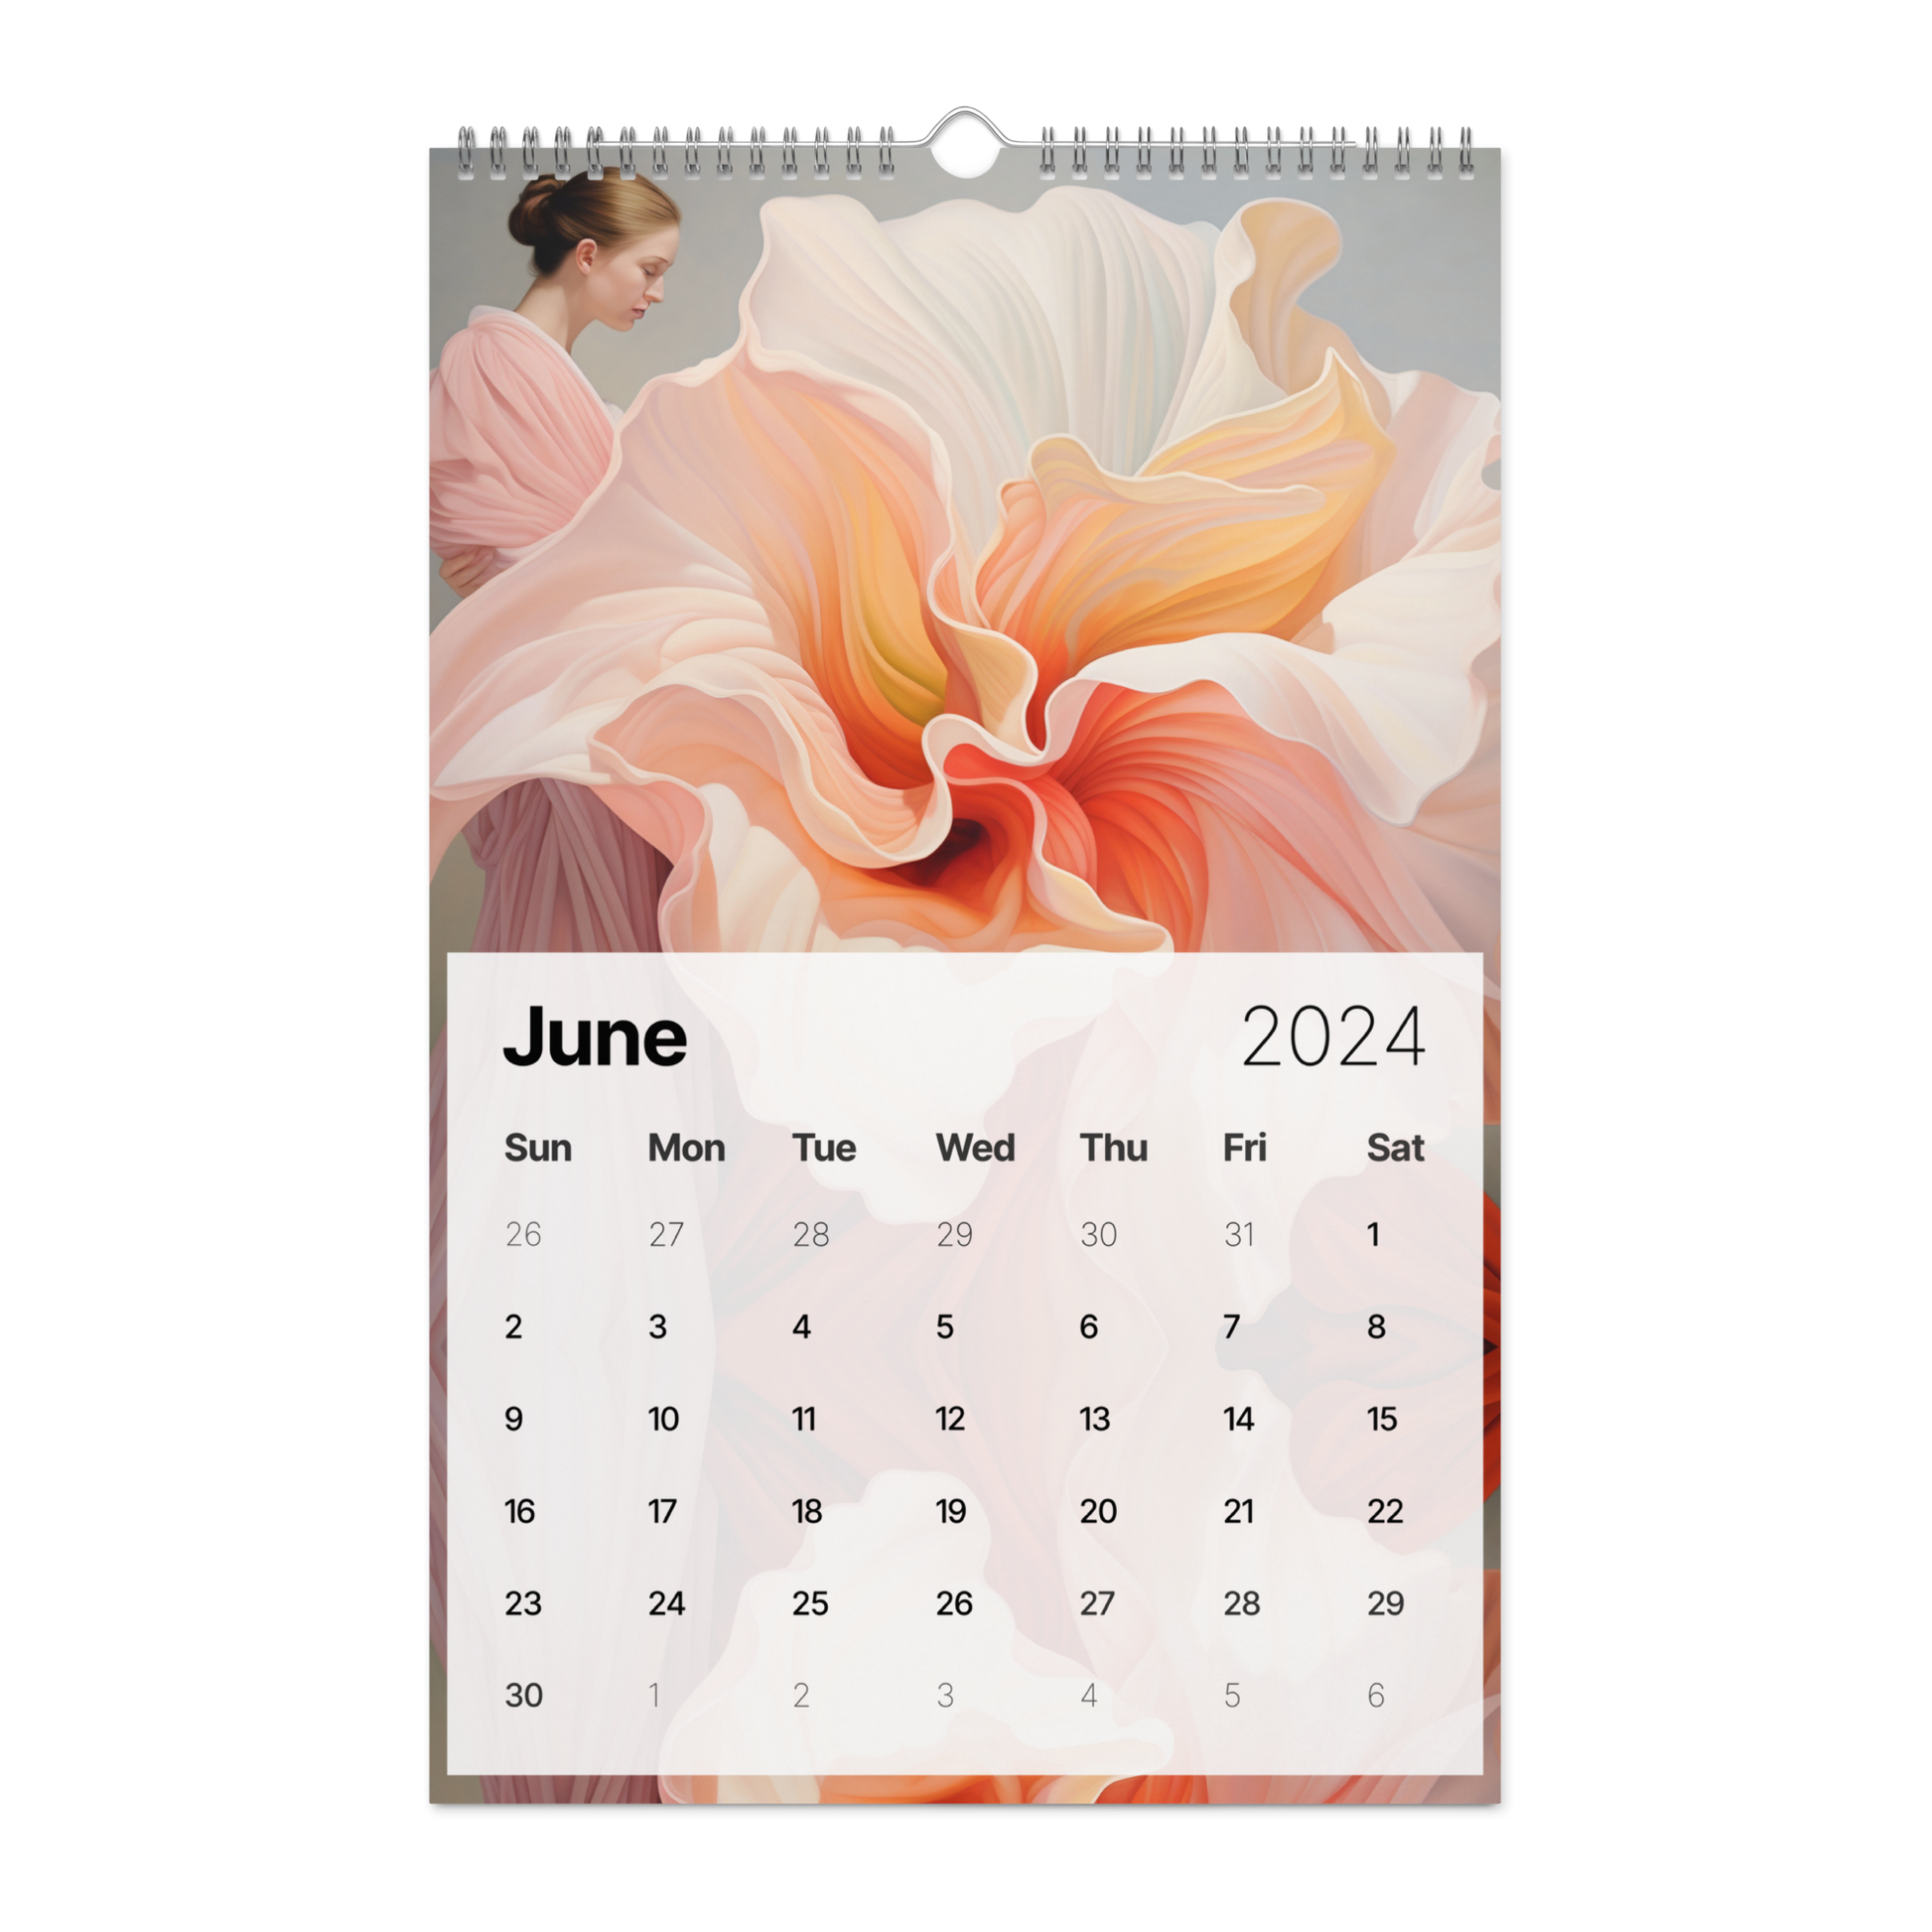 A decorative piece calendar featuring artwork of a woman holding flowers is titled "Flowers Are Magic." This wall calendar is for the year 2024.